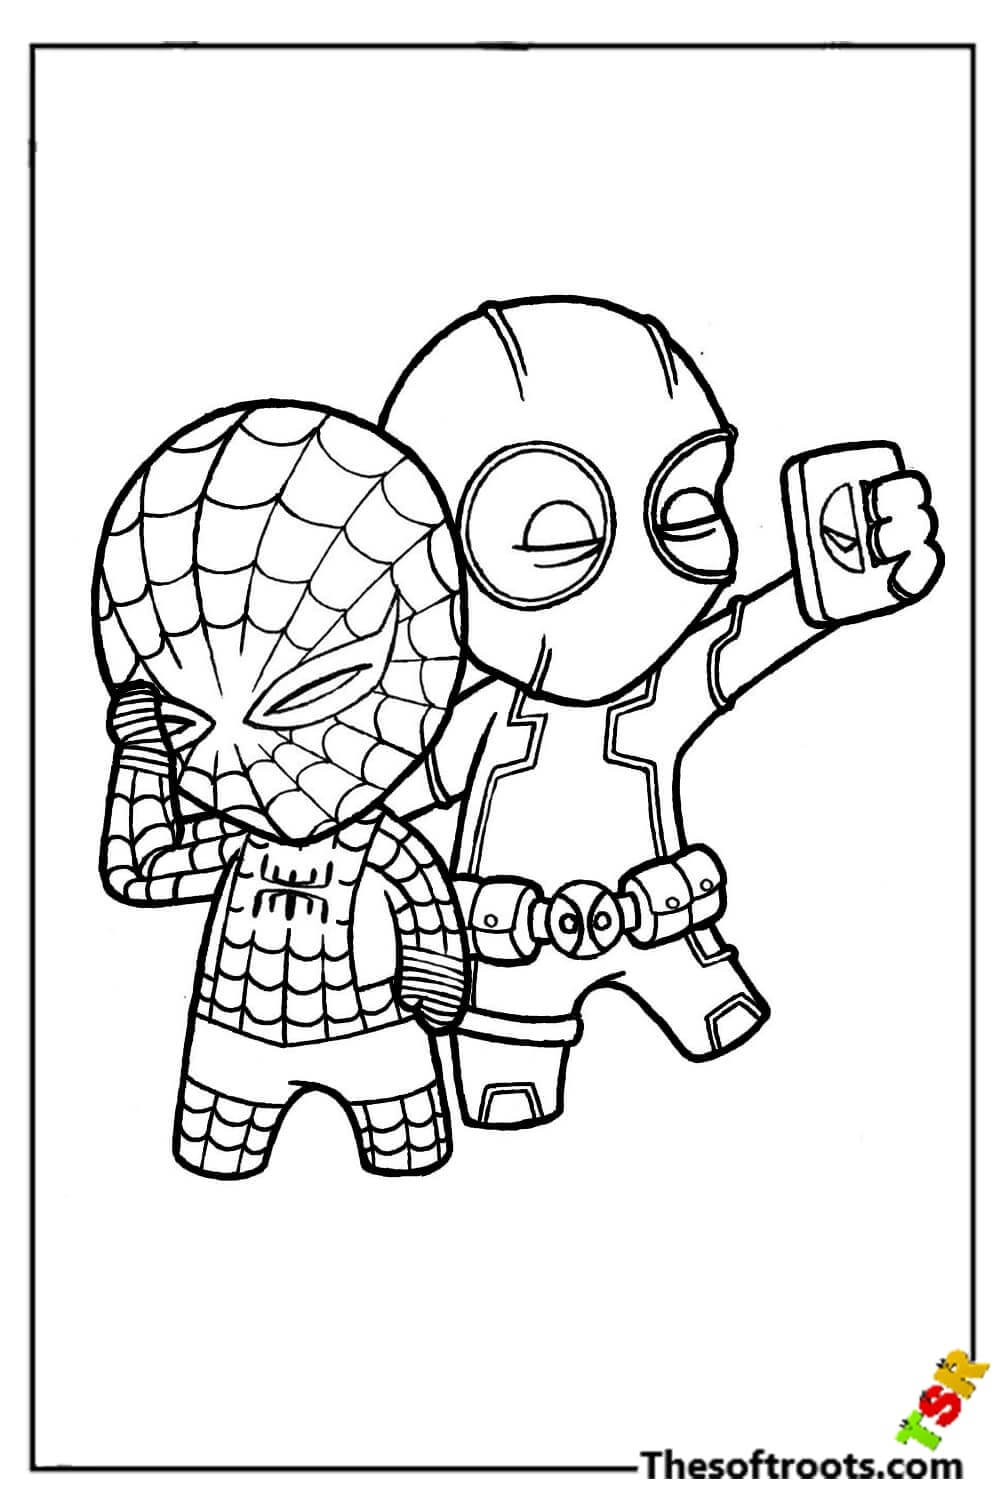 Selfie with Spiderman coloring pages